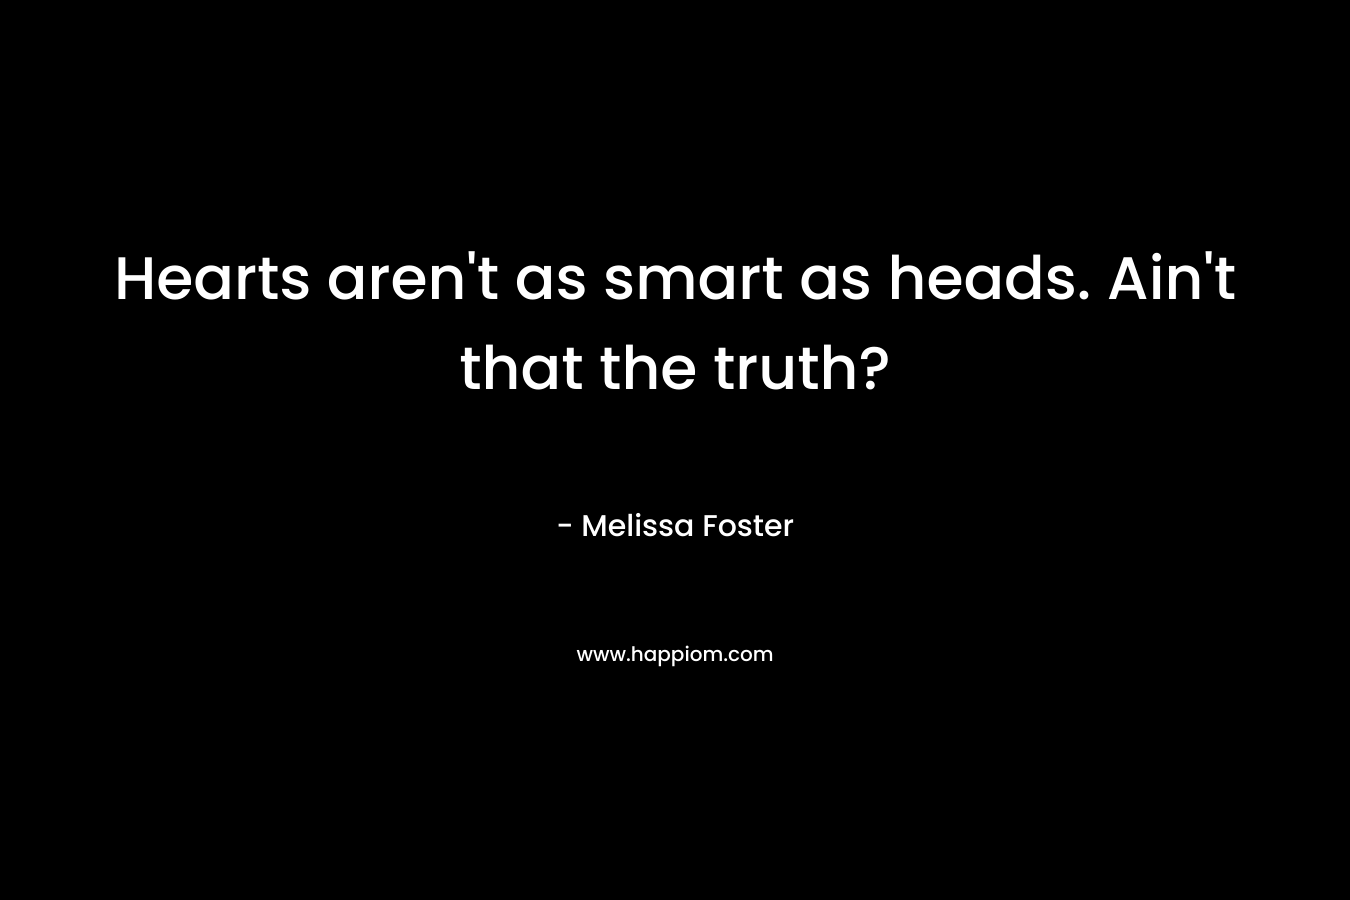 Hearts aren’t as smart as heads. Ain’t that the truth? – Melissa Foster